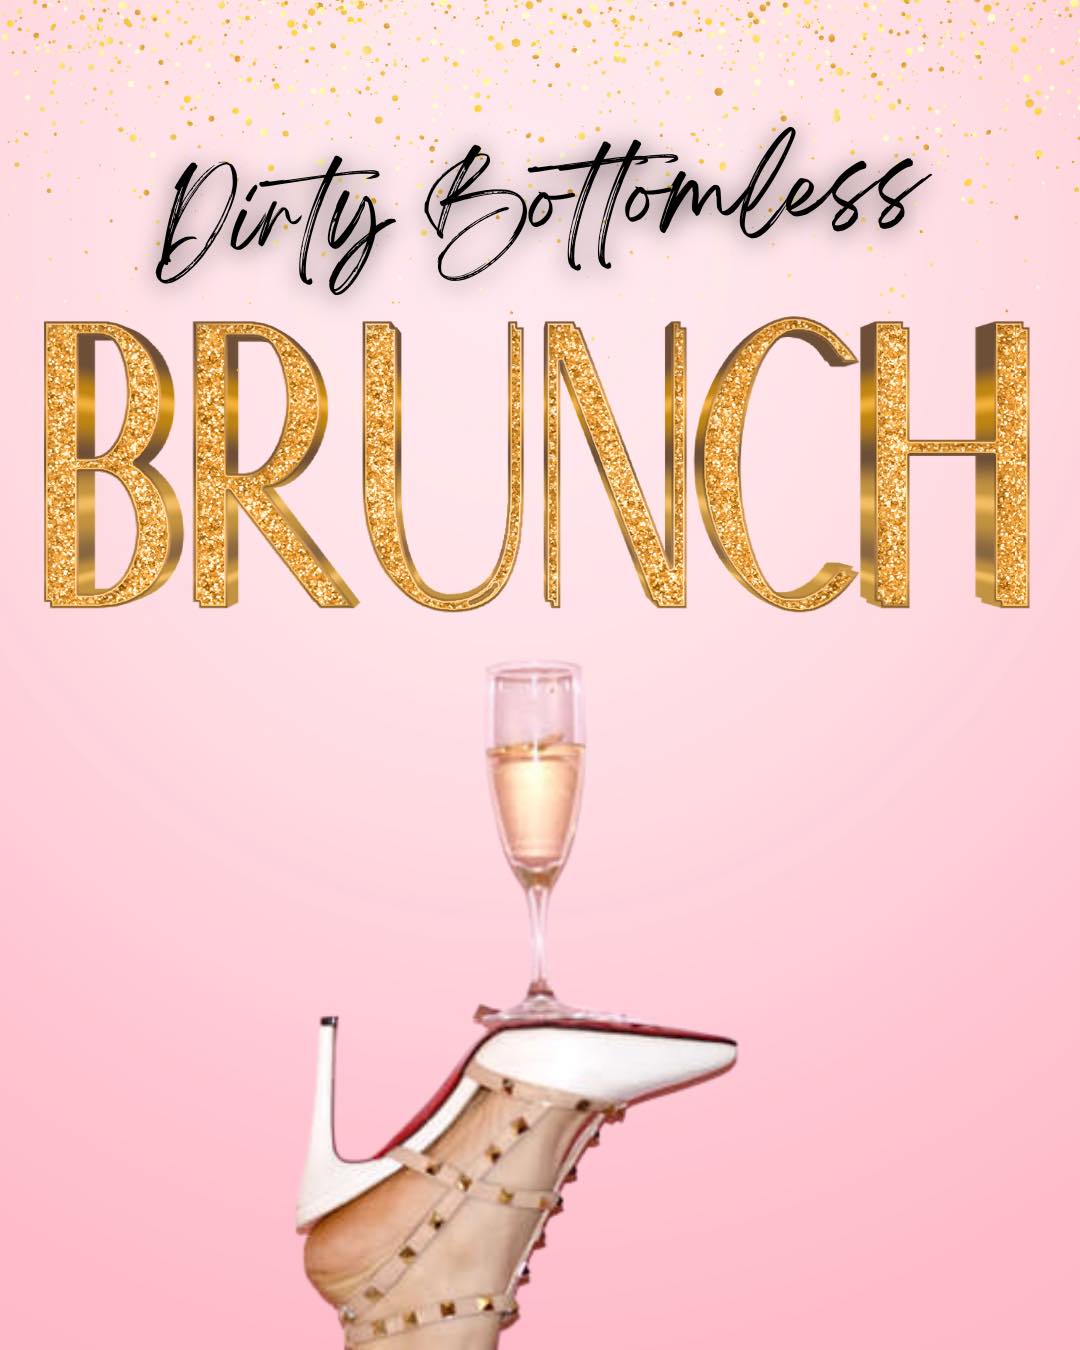 dirty bottomless brunch at The Guild